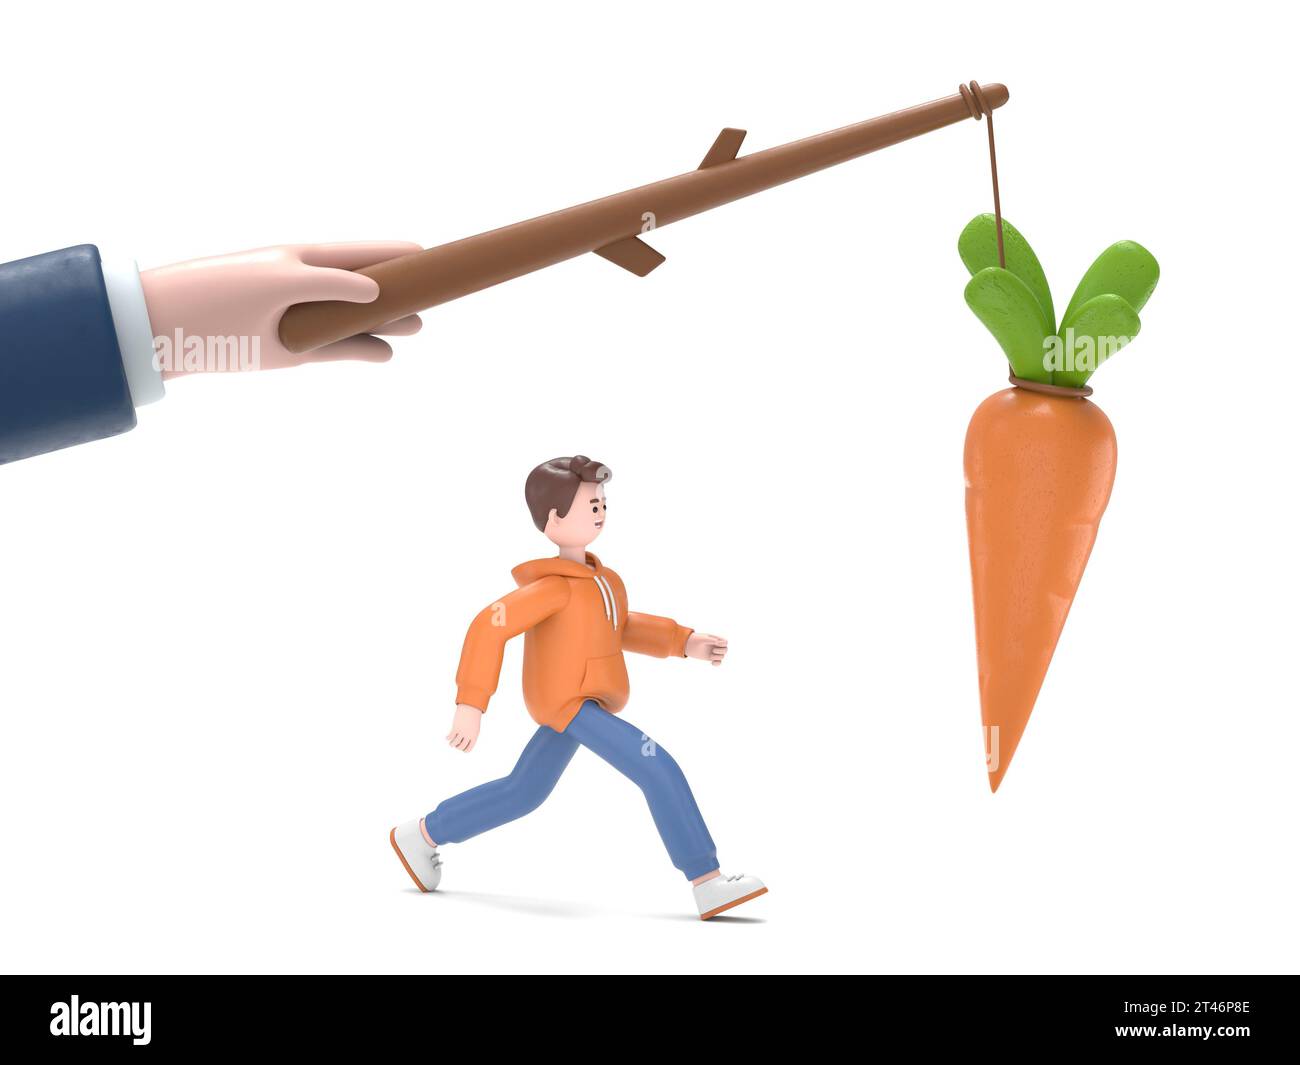 3D illustration of male guy Qadir running for bait,Big hand holds carrots on stick.Incentive concept. Business metaphor. Personnel management leadersh Stock Photo